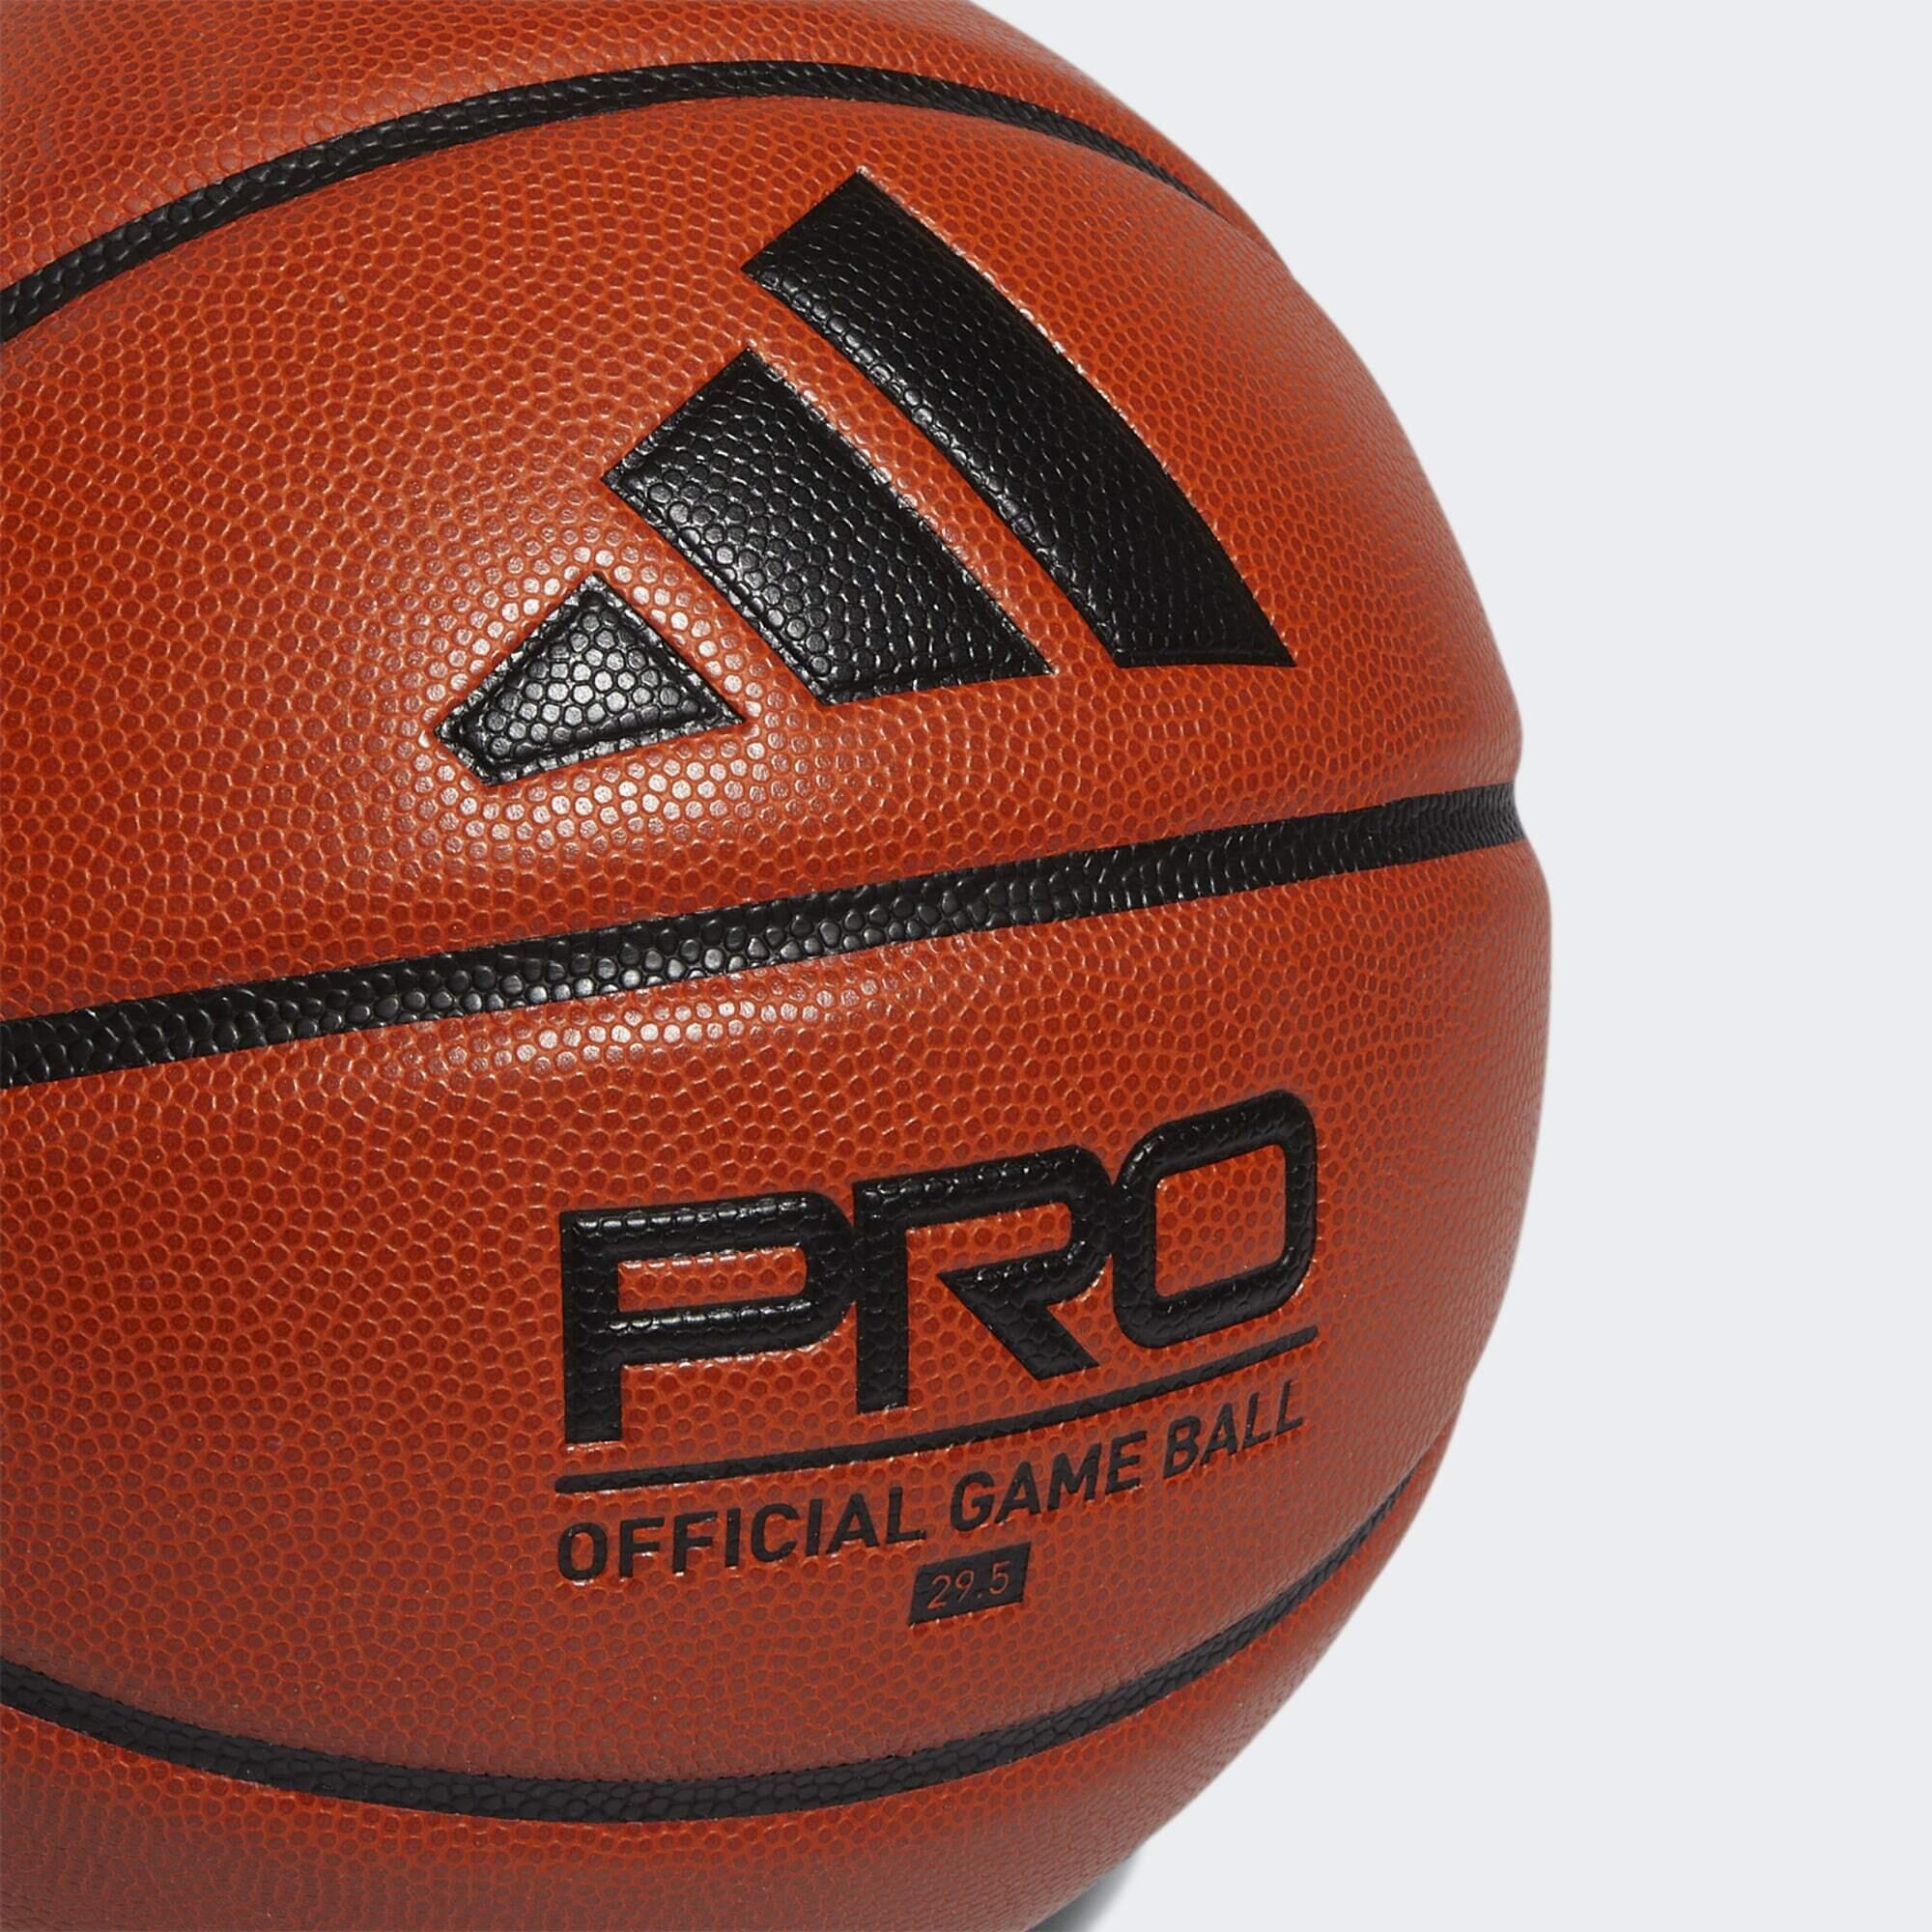 Pro 3.0 Official Game Ball 4/6